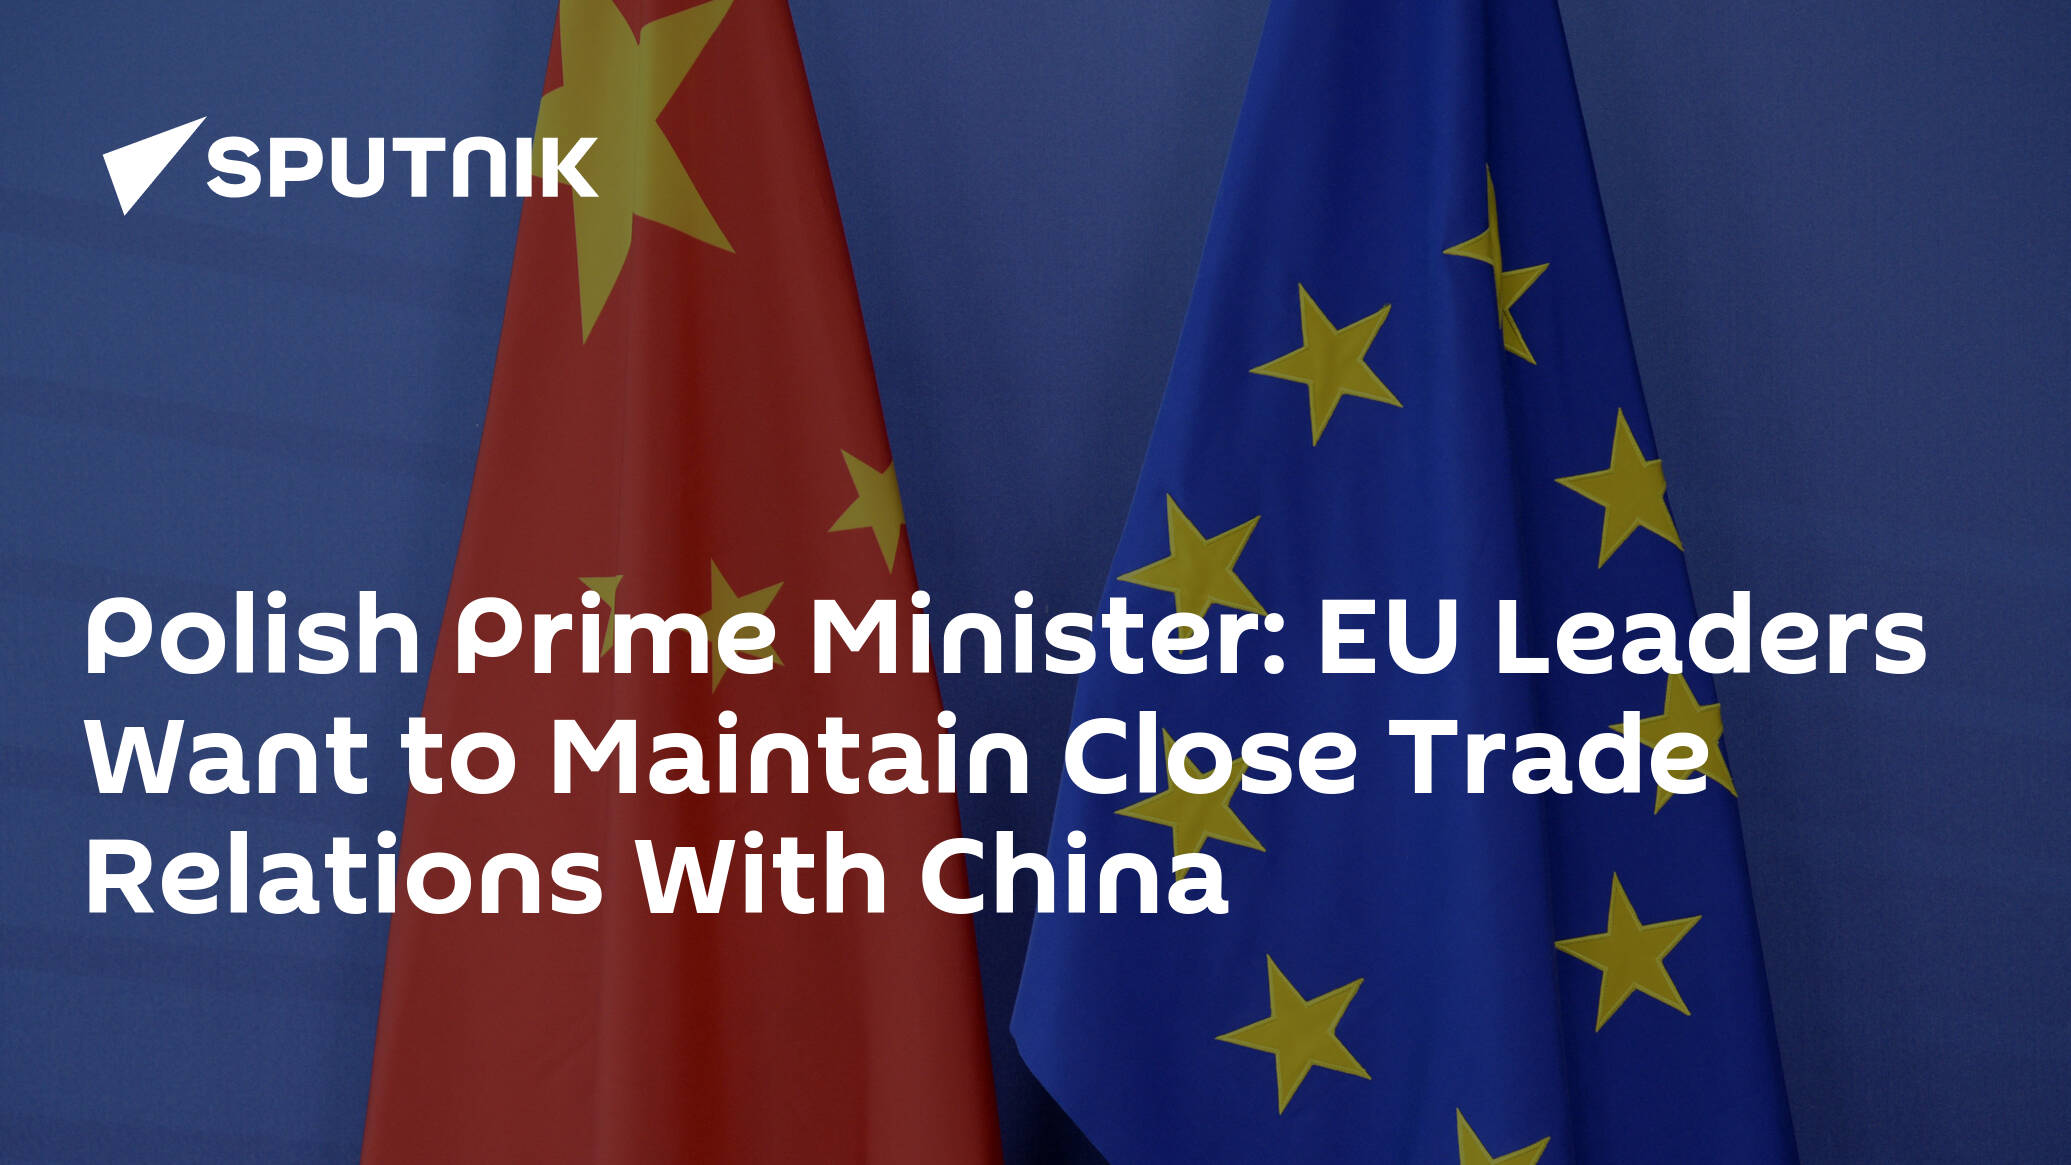 Polish Prime Minister: EU Leaders Want to Maintain Close Trade Relations With China